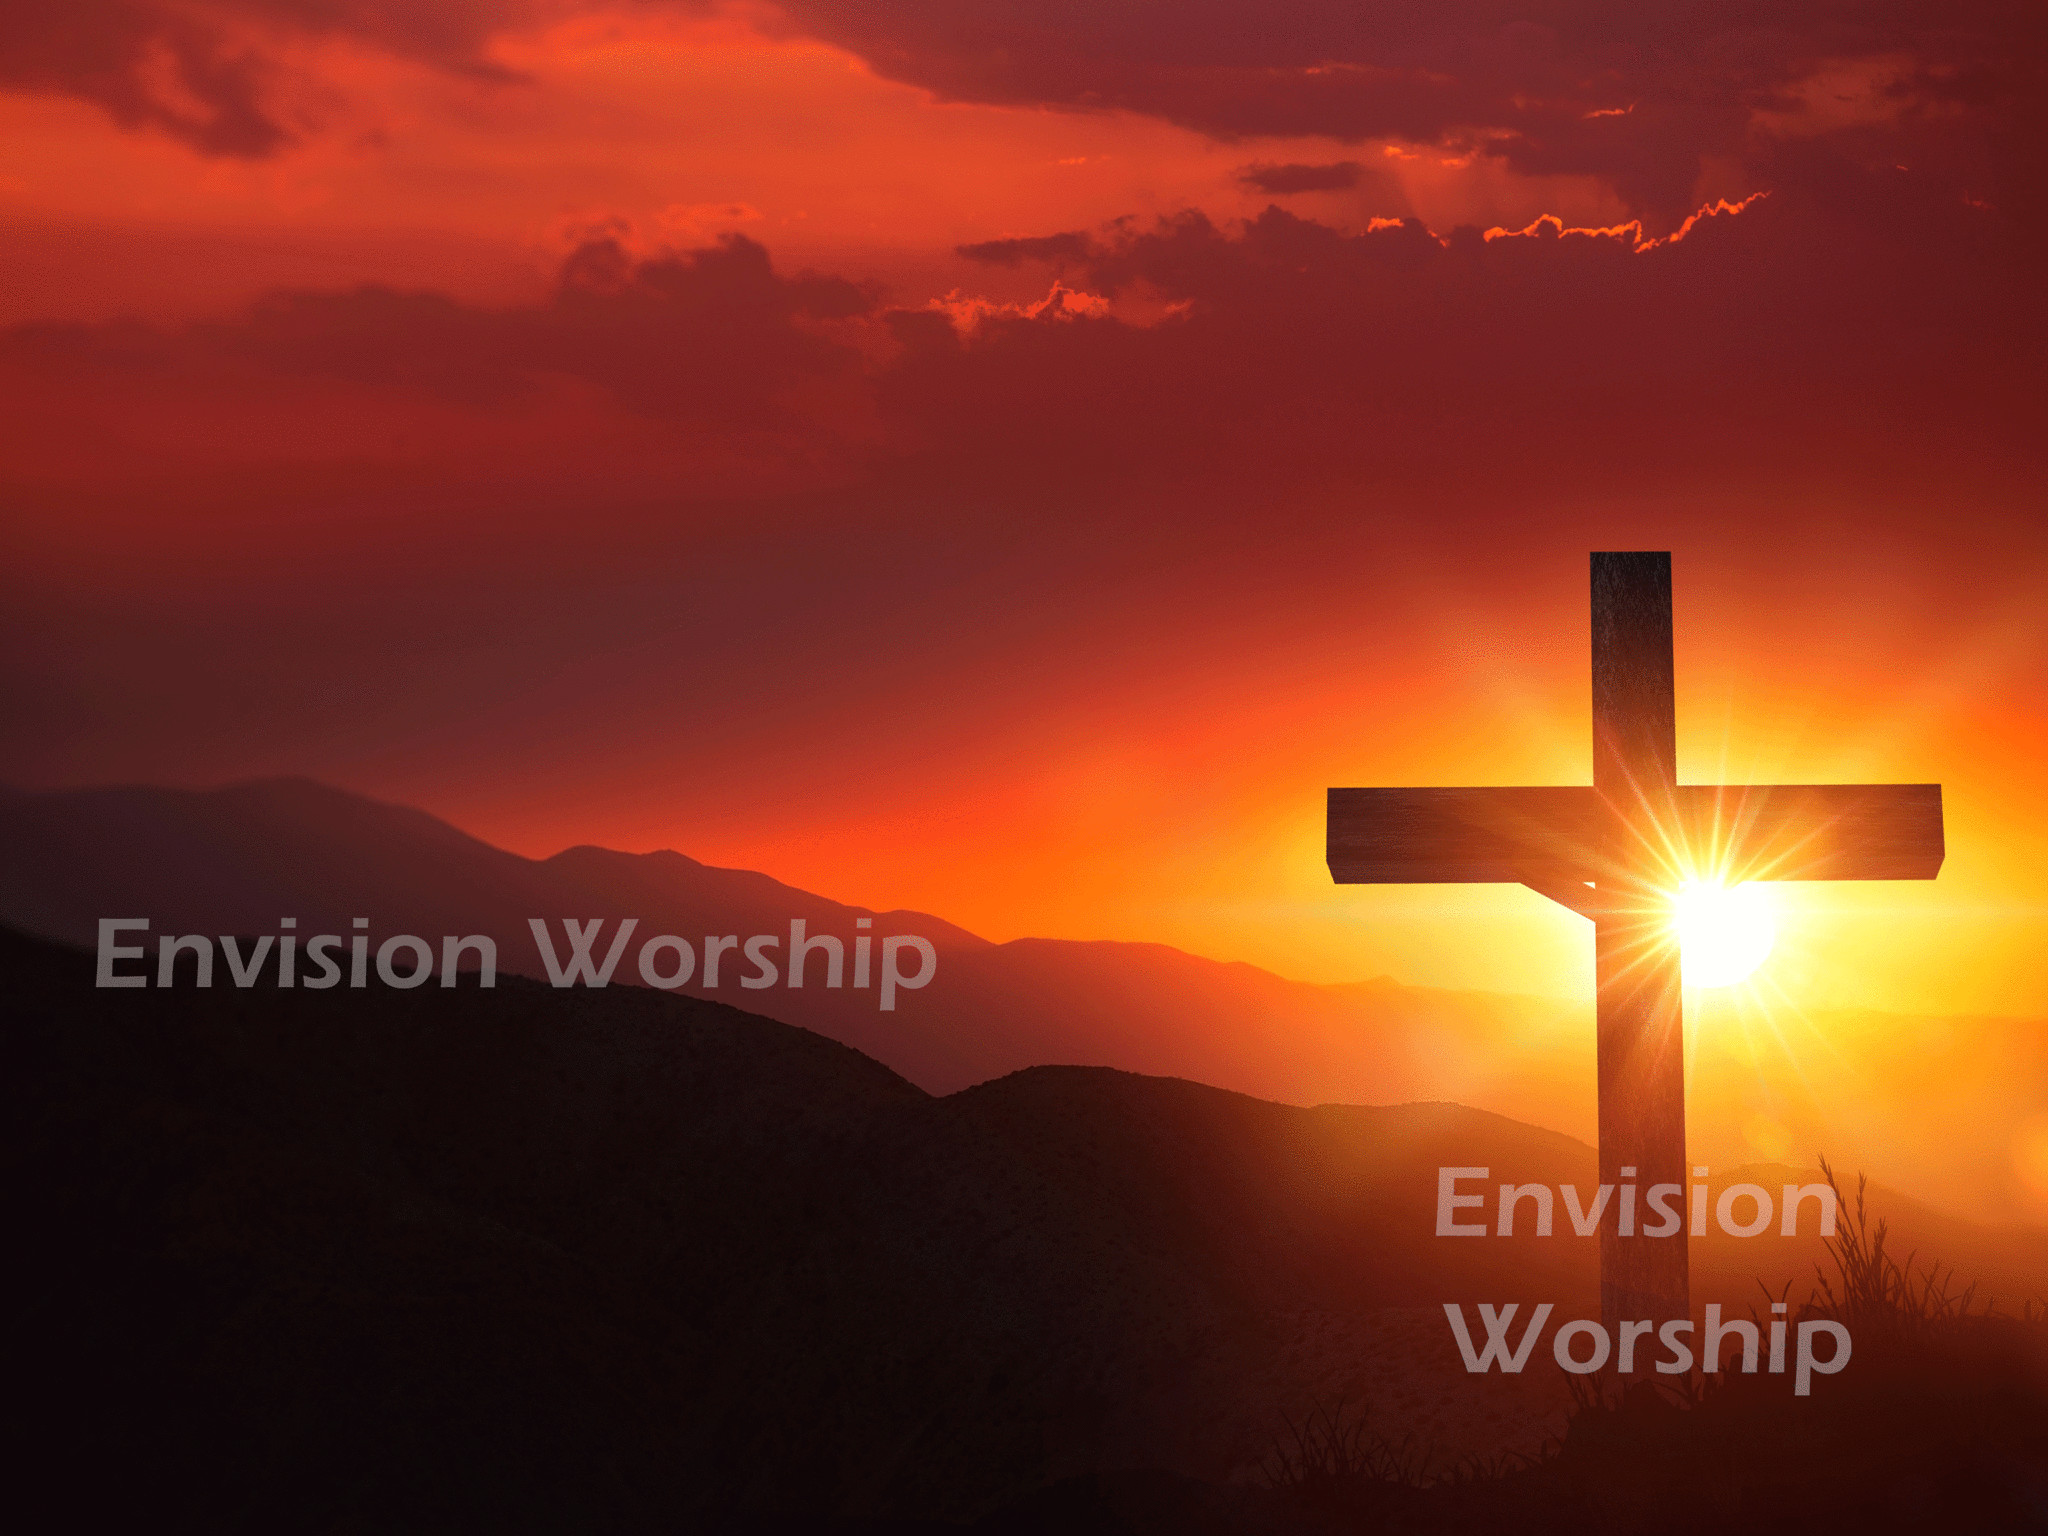 Christian Background Images (43+ images)